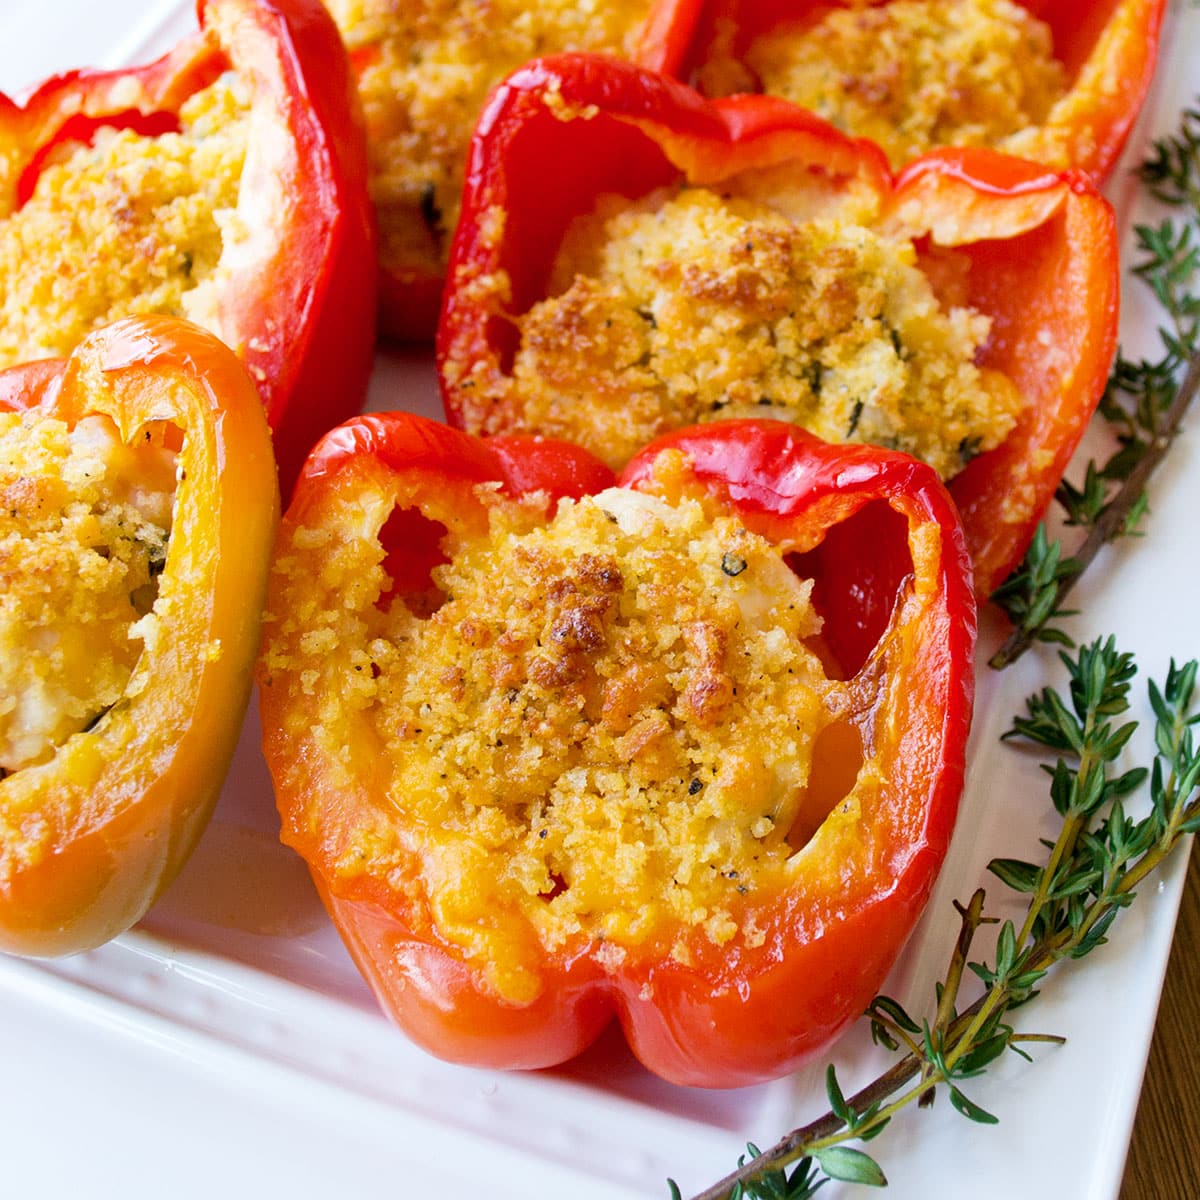 Red bell pepper halves stuffed with chicken and cheese and topped with panko breadcrumbs that are browned.